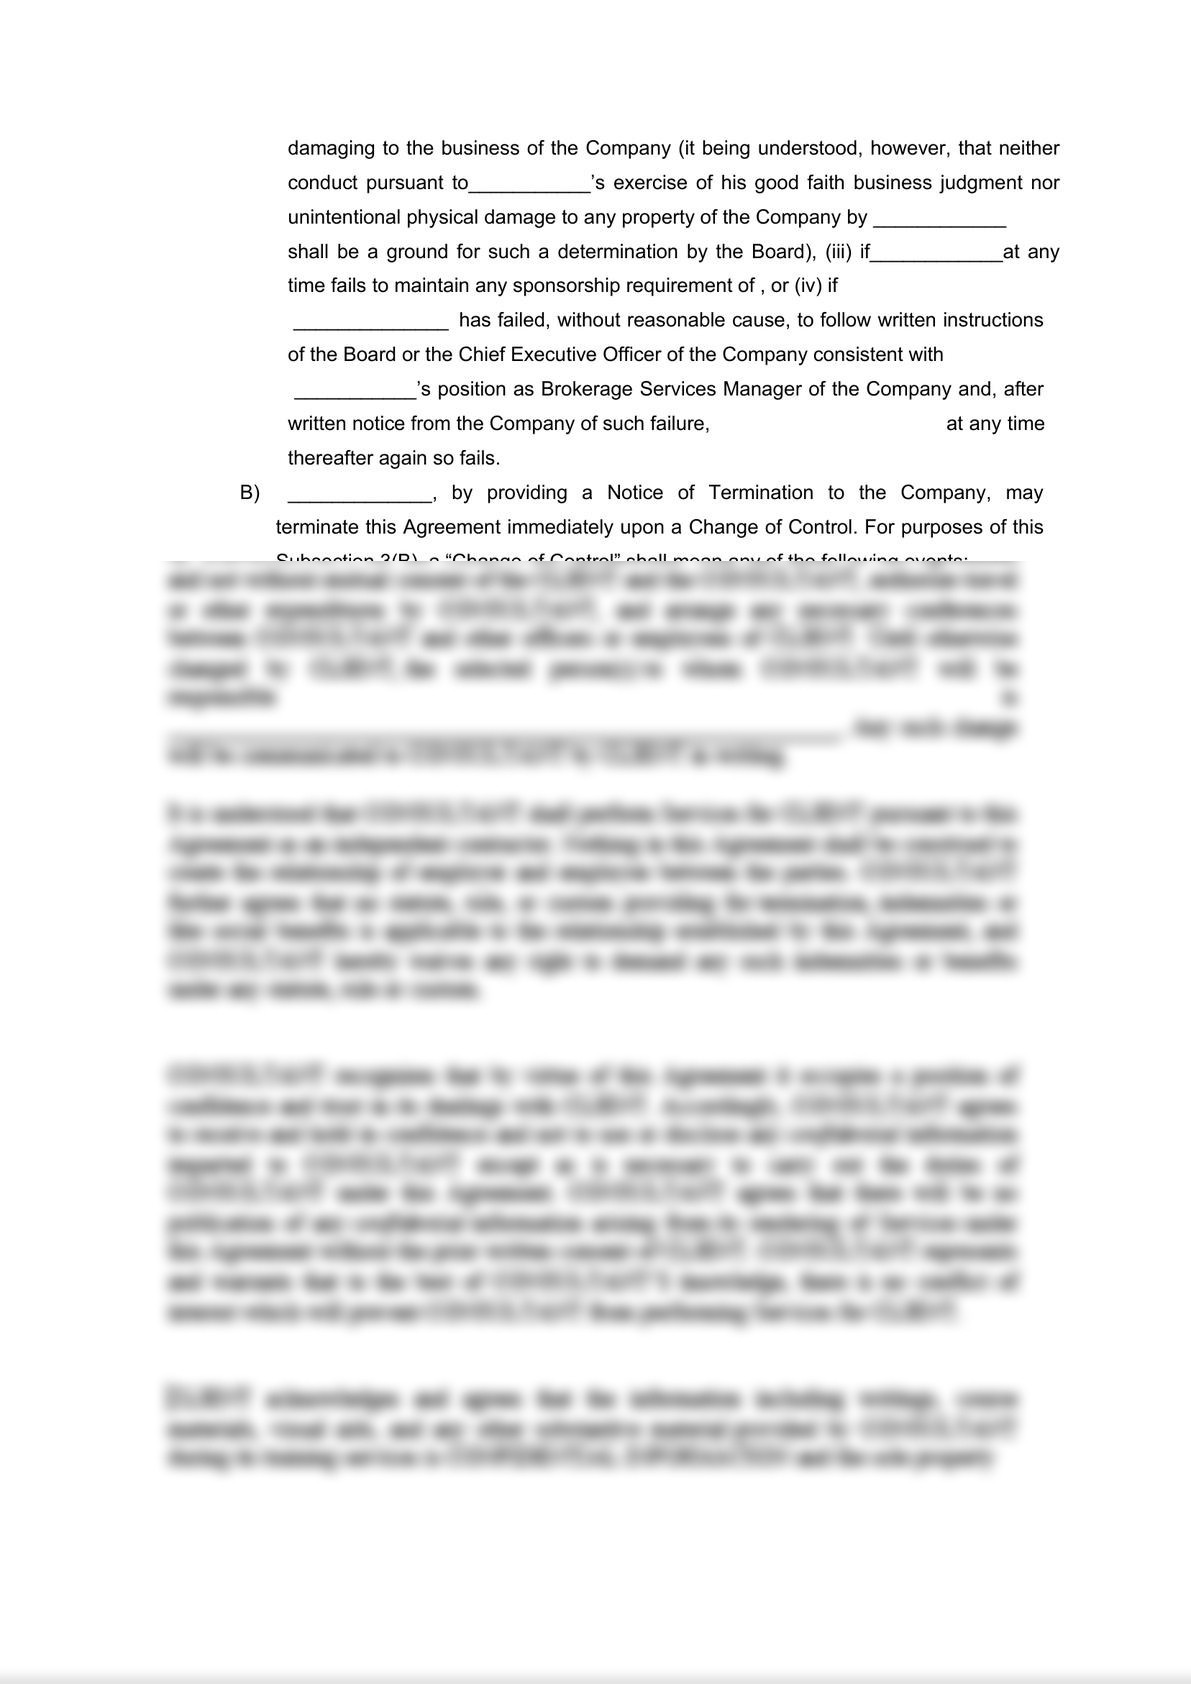 General Commission Agreement-2